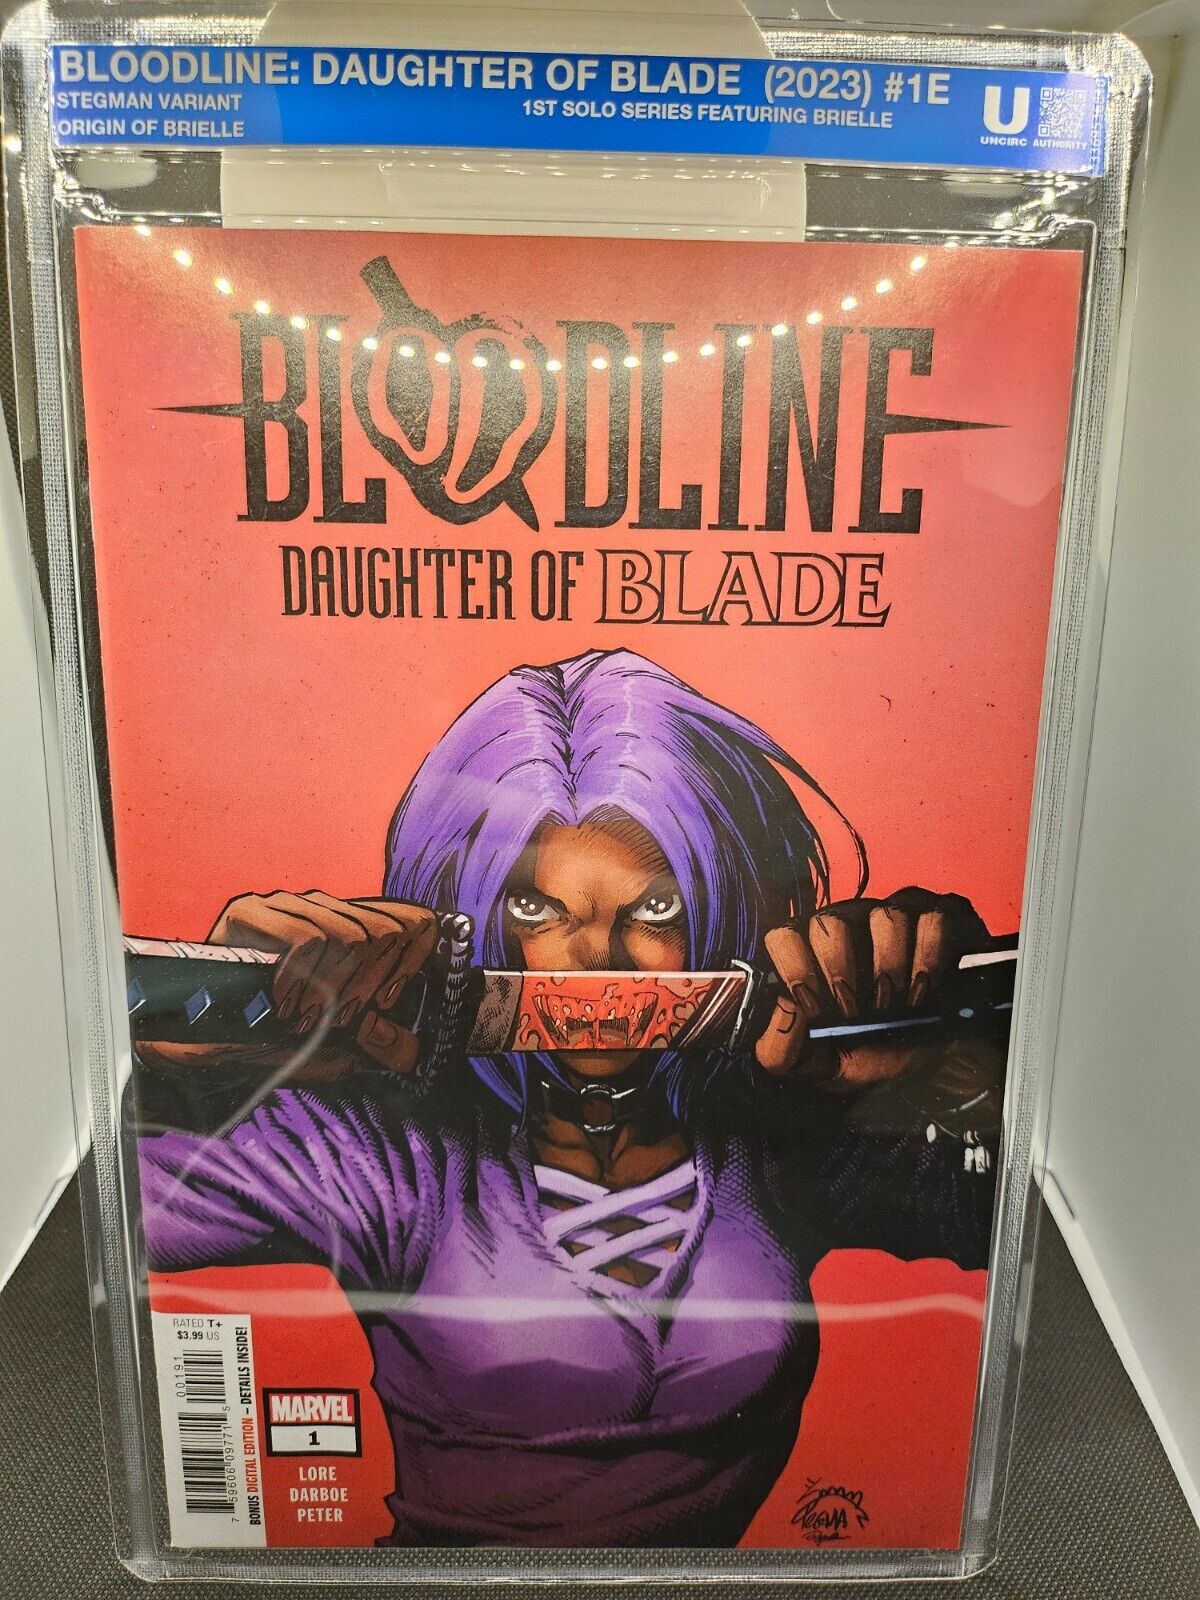 BLOODLINE: DAUGHTER OF BLADE STEGMAN VARIANT UNCIRCULATED RARE #1E